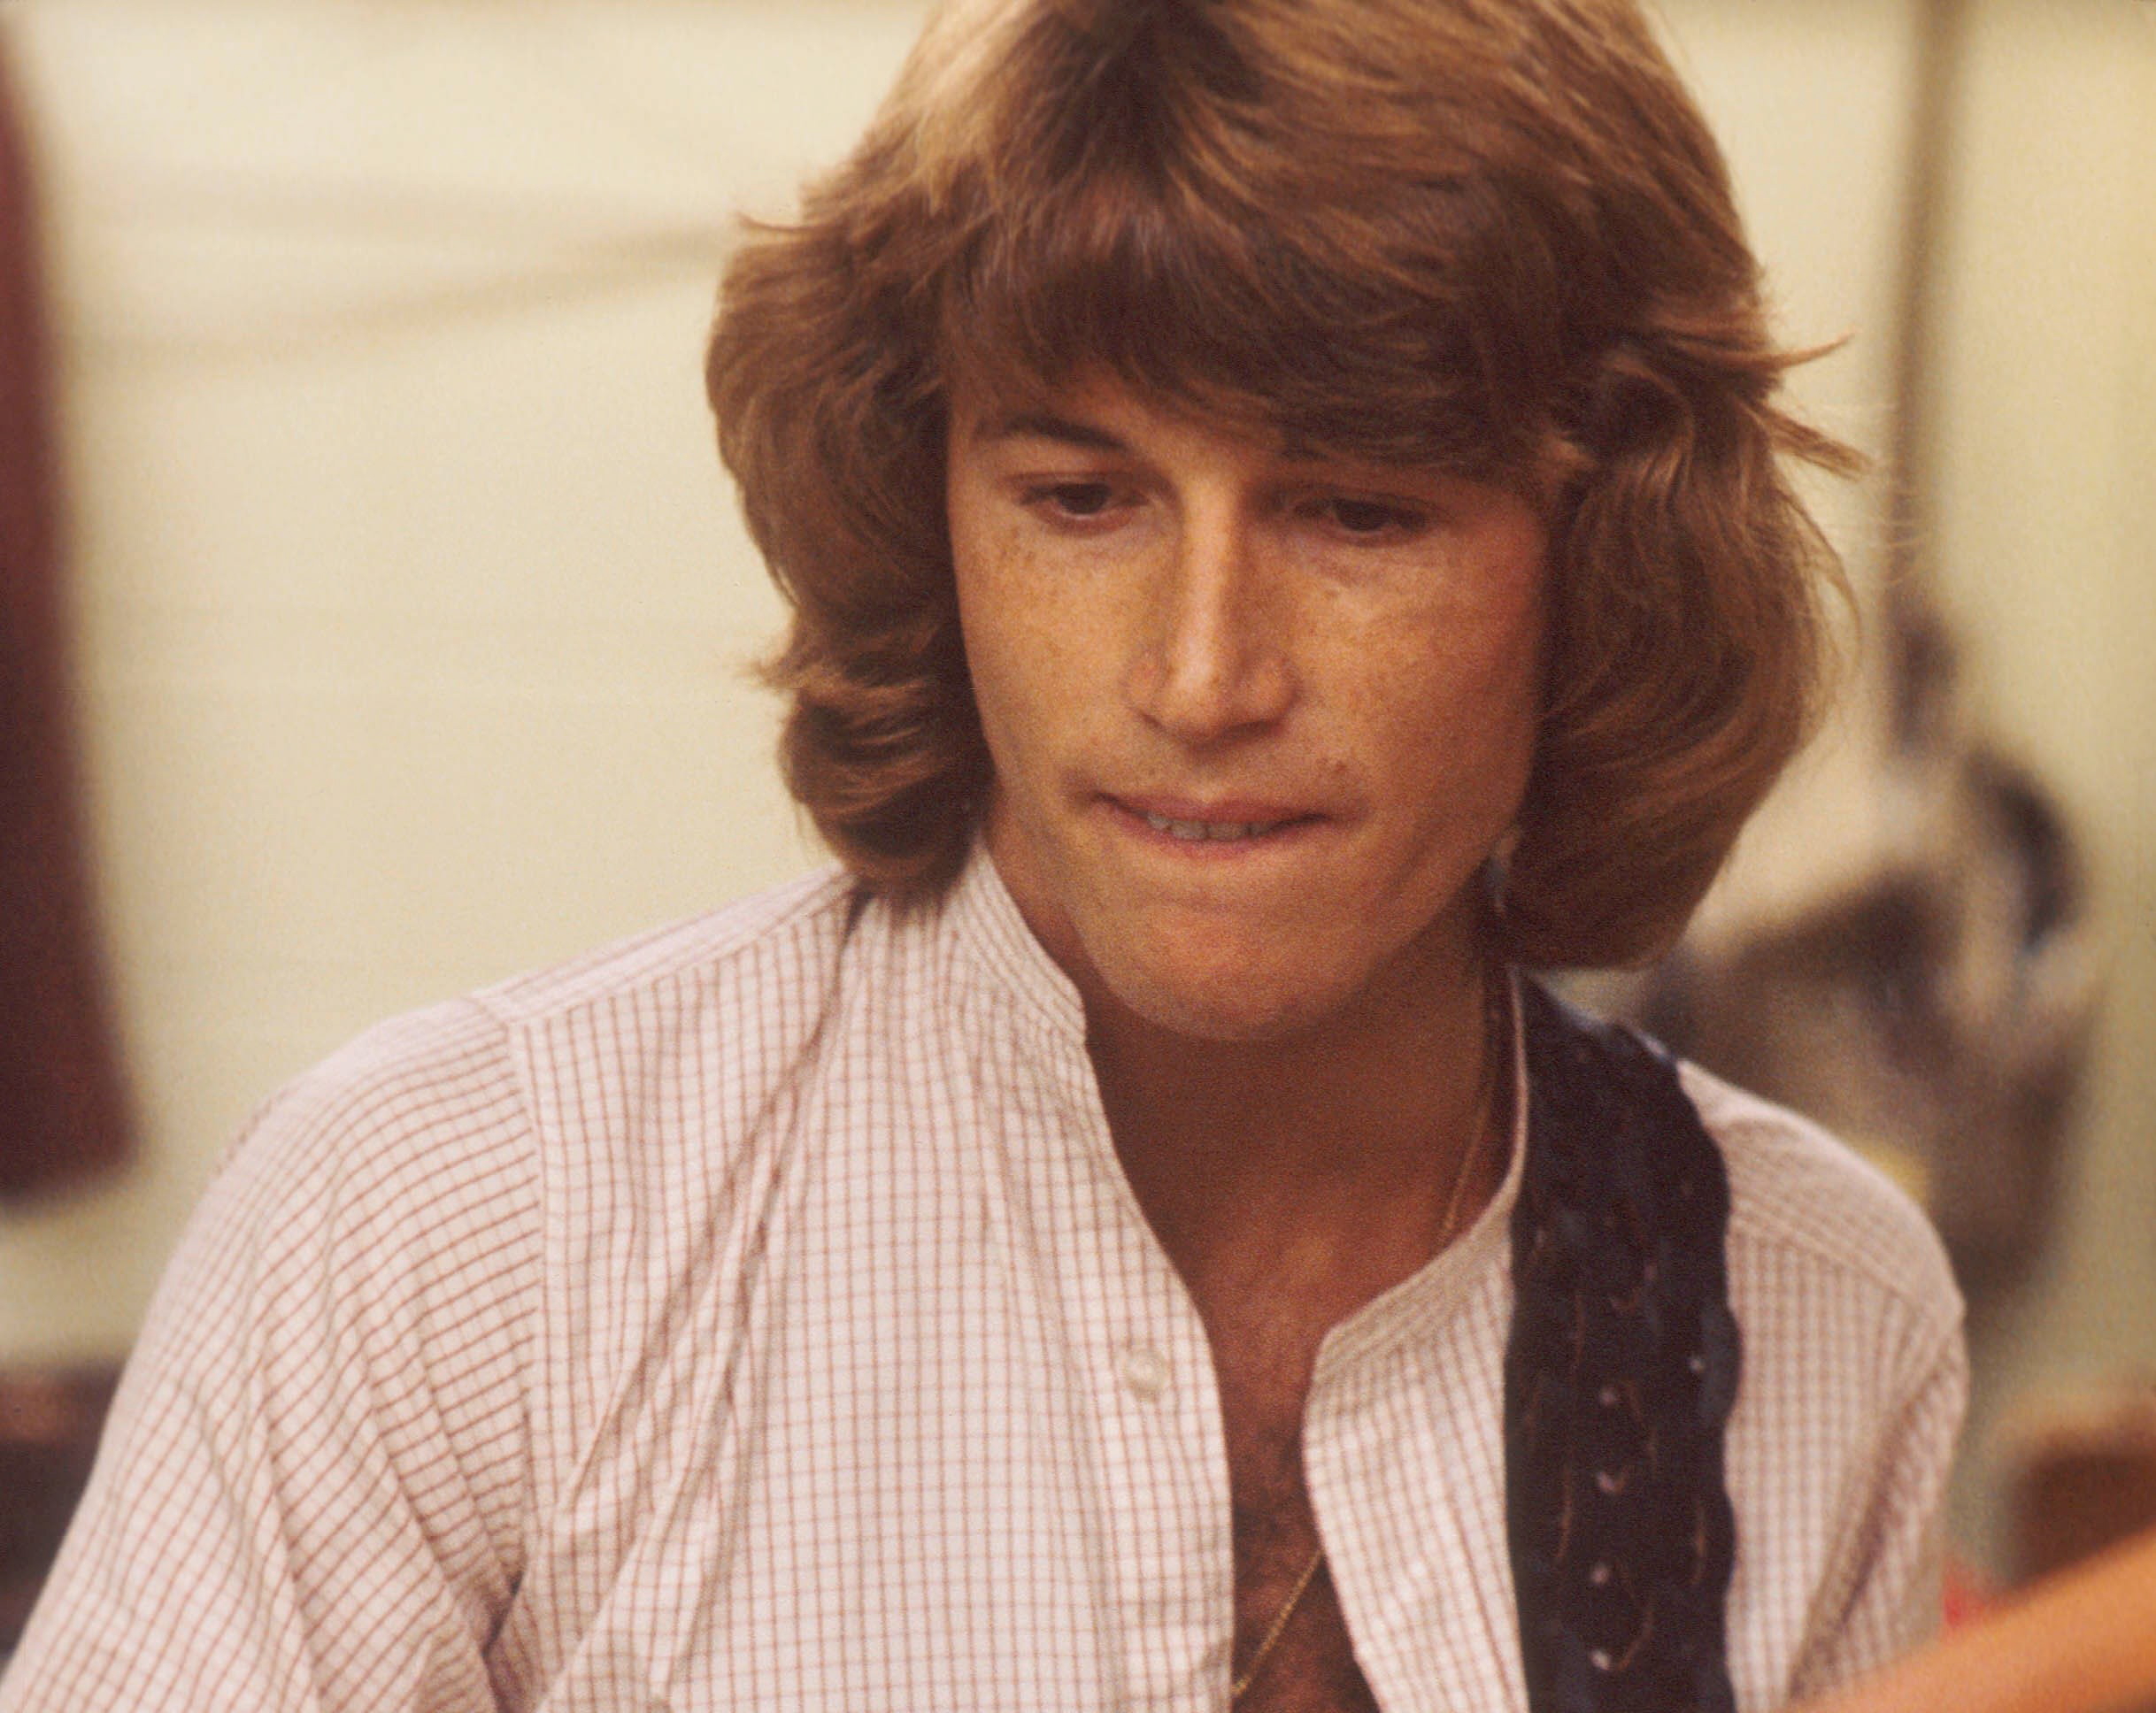 <p>To launch their career, Andy Gibb and his band booked <em>The Ernie Sigley Show</em> where they would perform live. After singing “To a Girl," the host announced the song was part of Gibb’s new album. How exciting! There was one thing though. Because of Gibb’s unreliability, the album didn’t exist. Worse still, it never would. </p>  <p>Frustrated with Gibb, his bandmates eventually abandoned him, packing up their bags and heading home. Gibb seemed to want to do the impossible. Have a huge career, not from hard work but based on his talent alone. As it turned out, it was actually possible. </p>